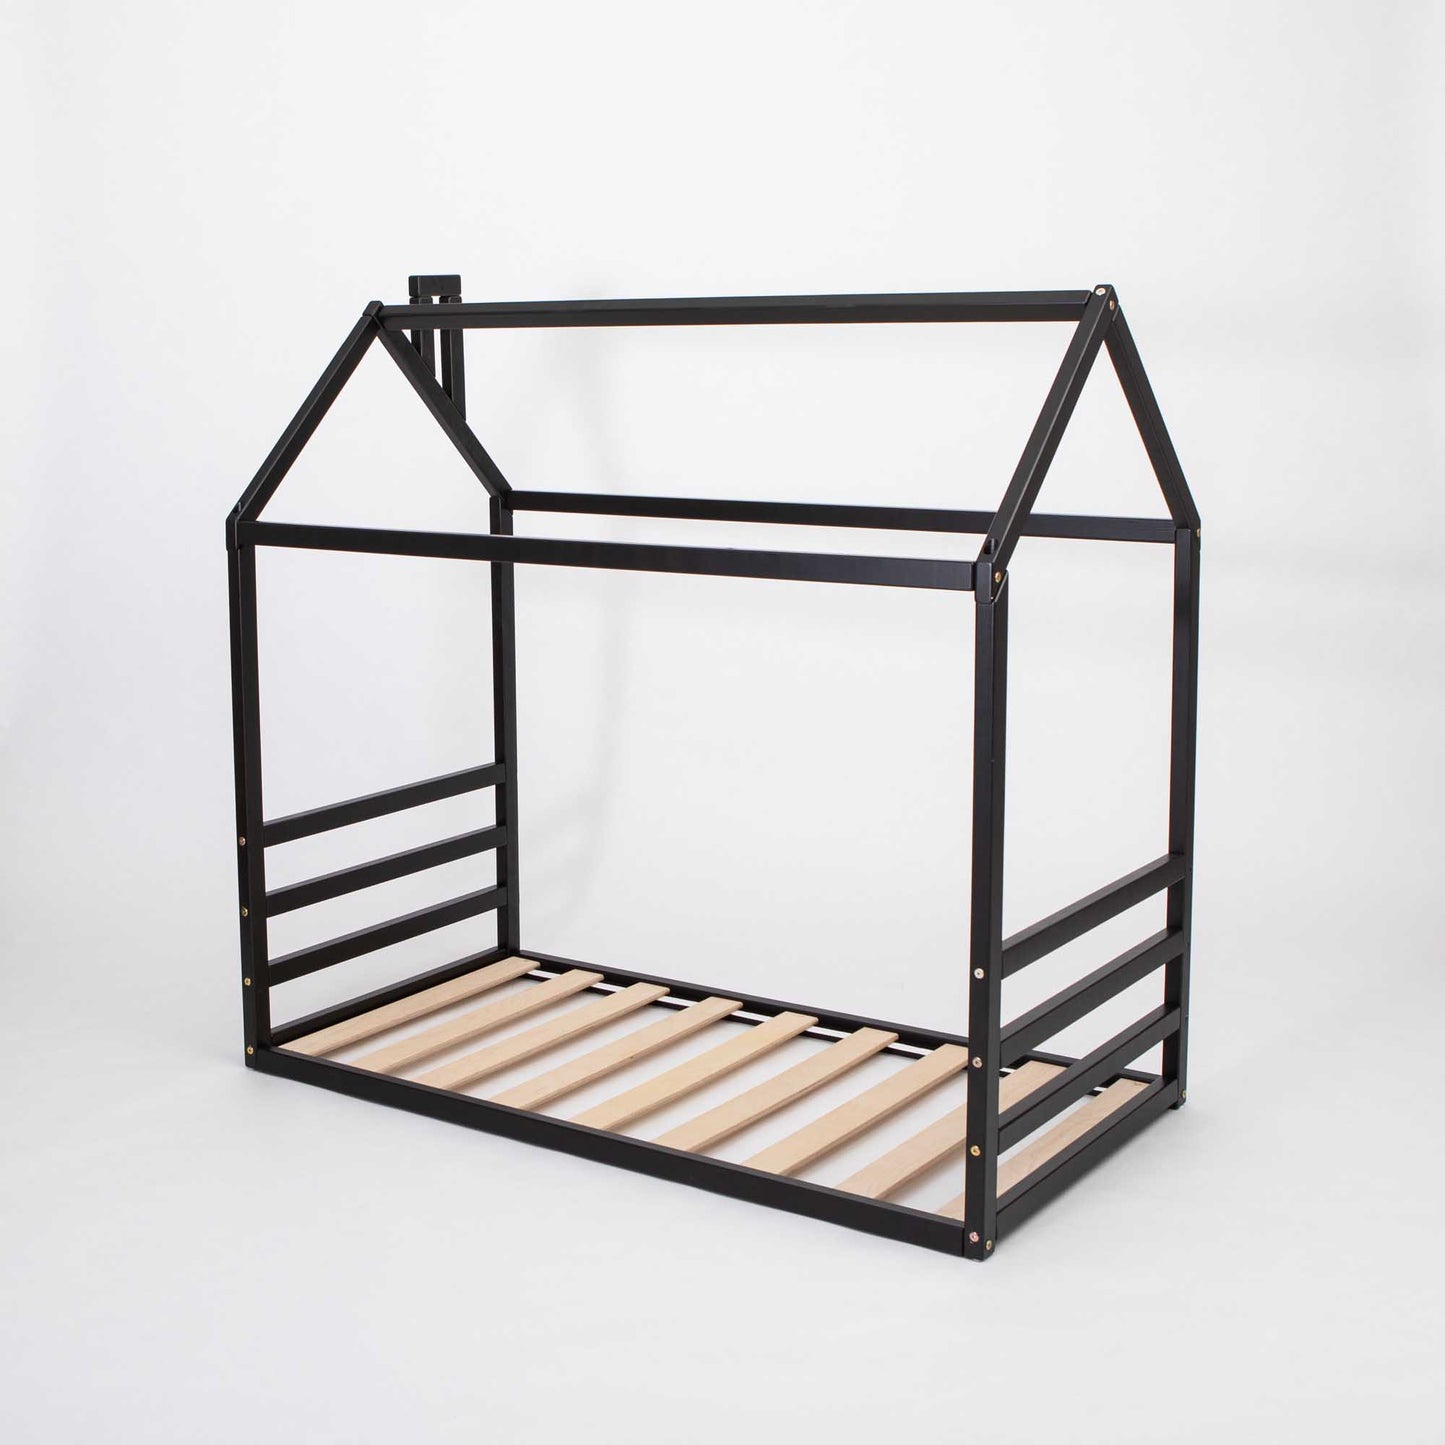 A black metal floor house-frame bed with wooden slats, perfect as a low platform bed or floor level bed for kids.